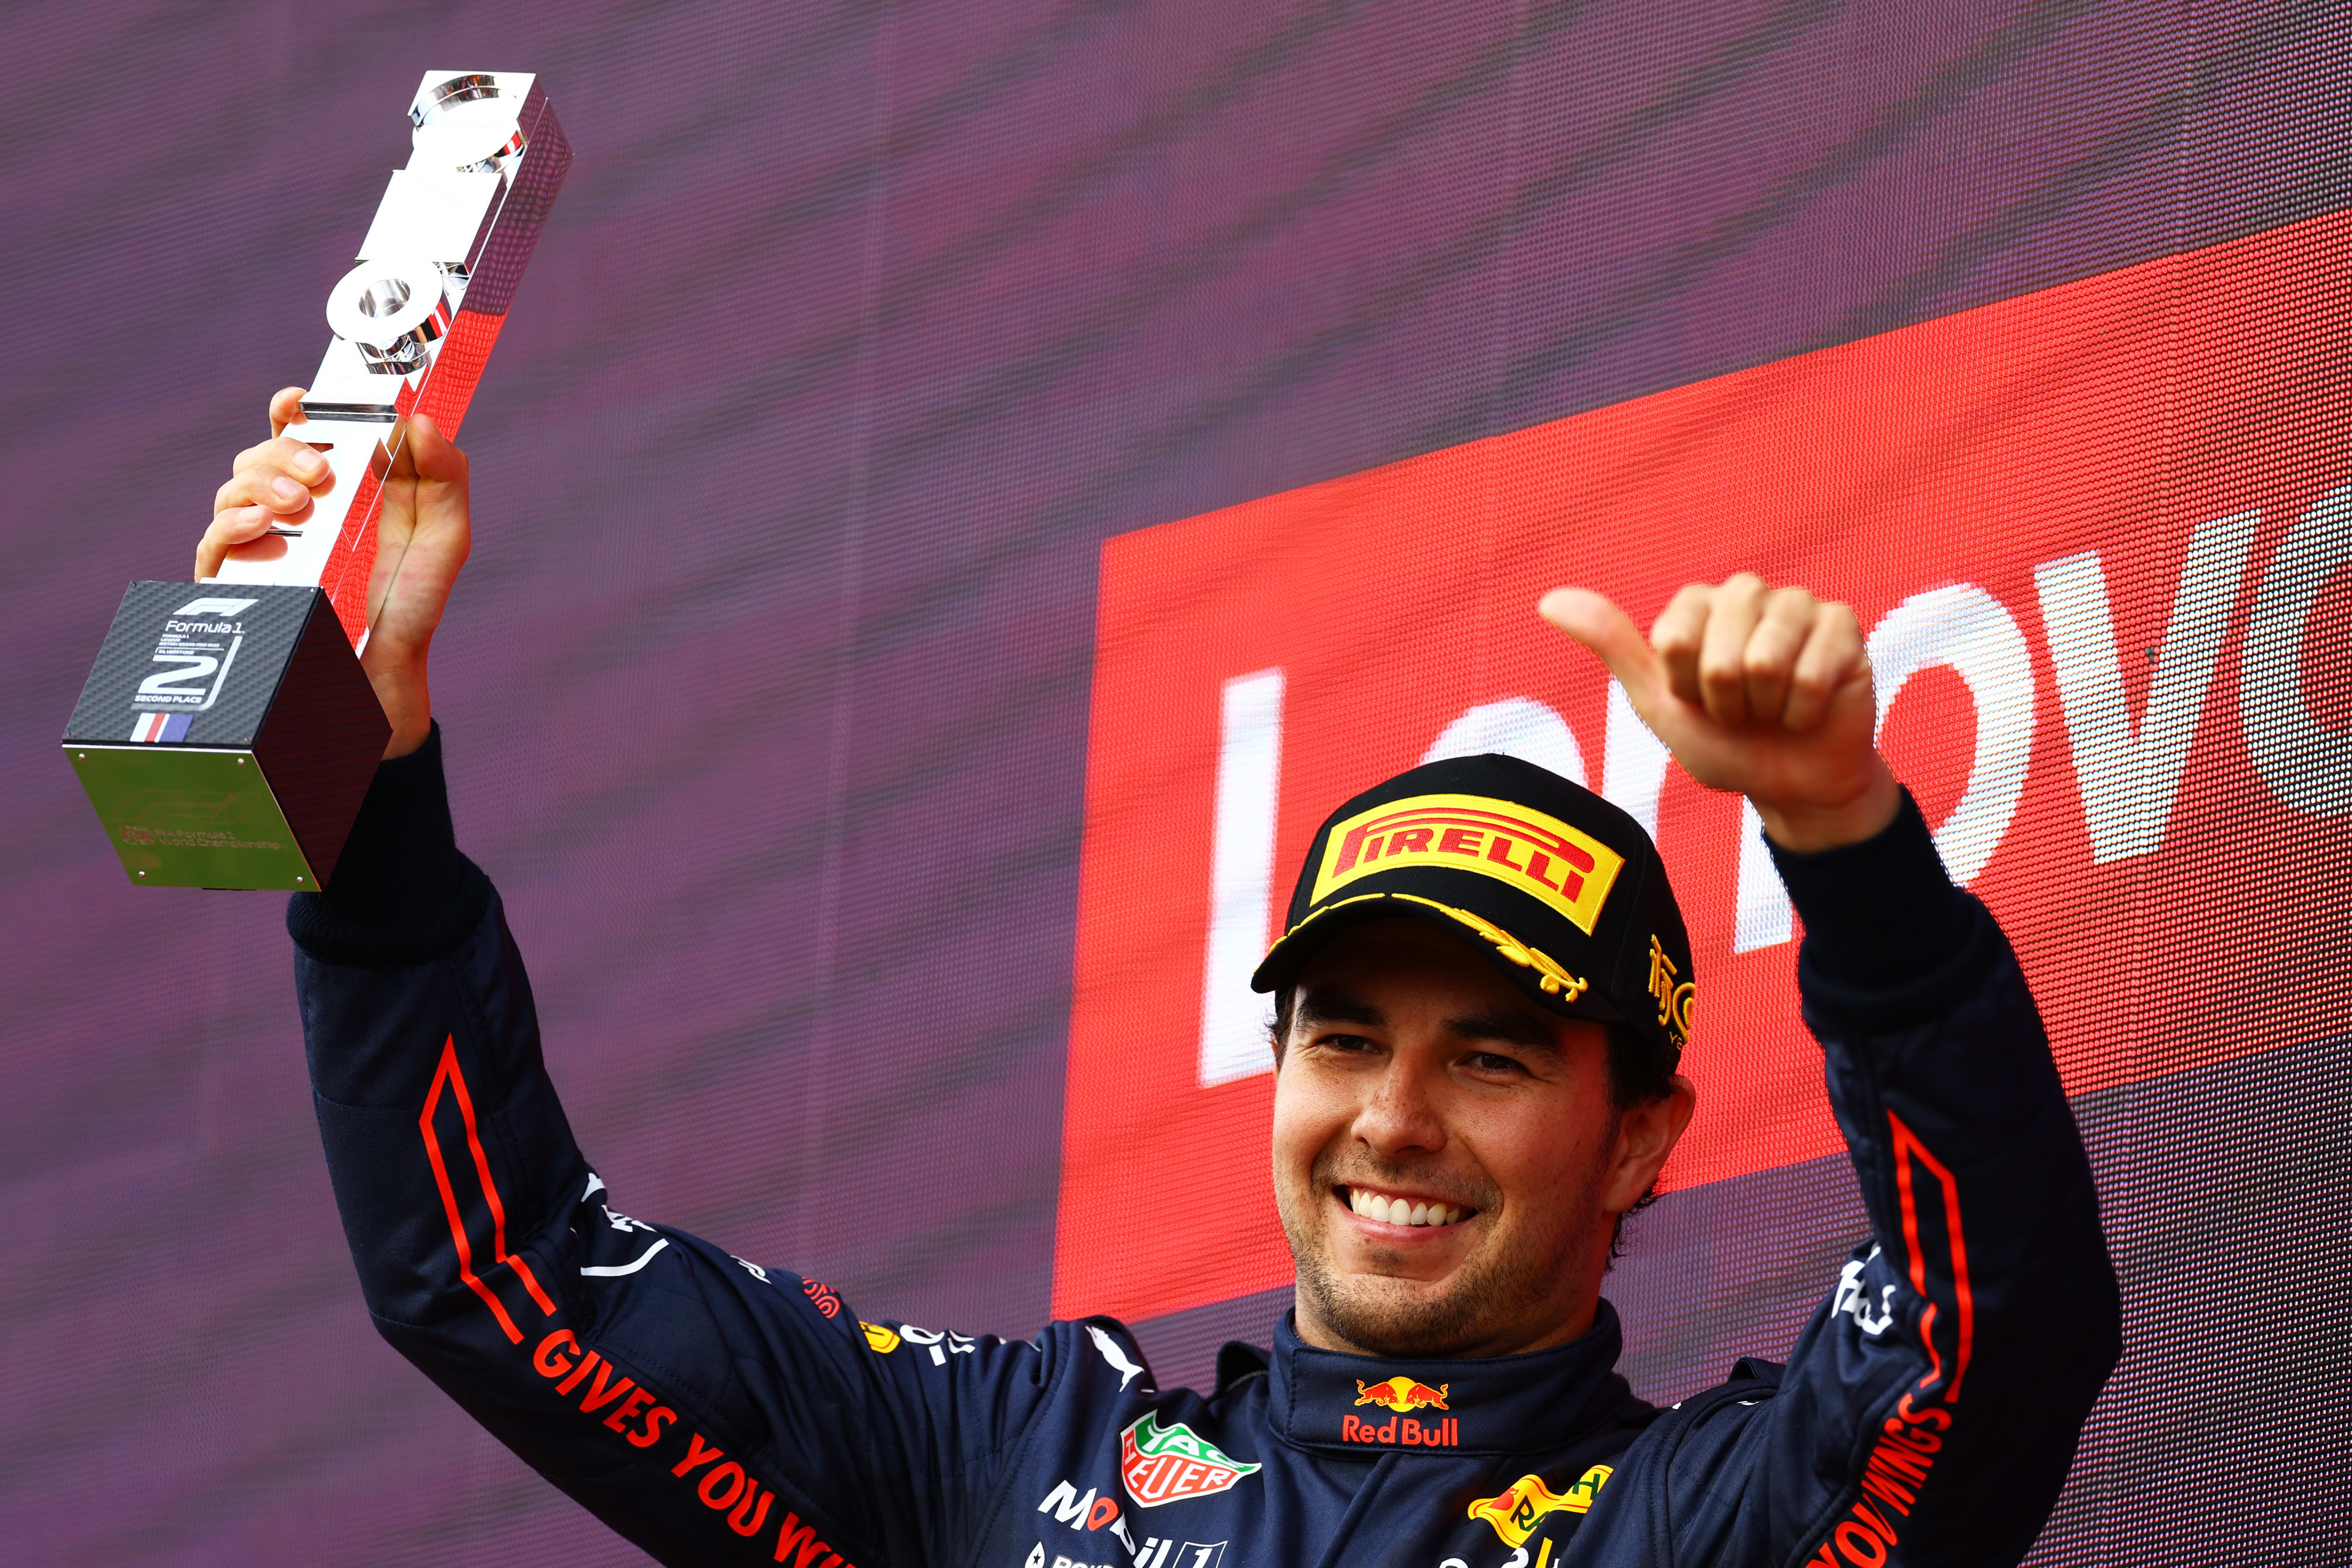 F1 results: British GP 2022 standings in full as Carlos Sainz claims maiden  win after huge Zhou Guanyu crash